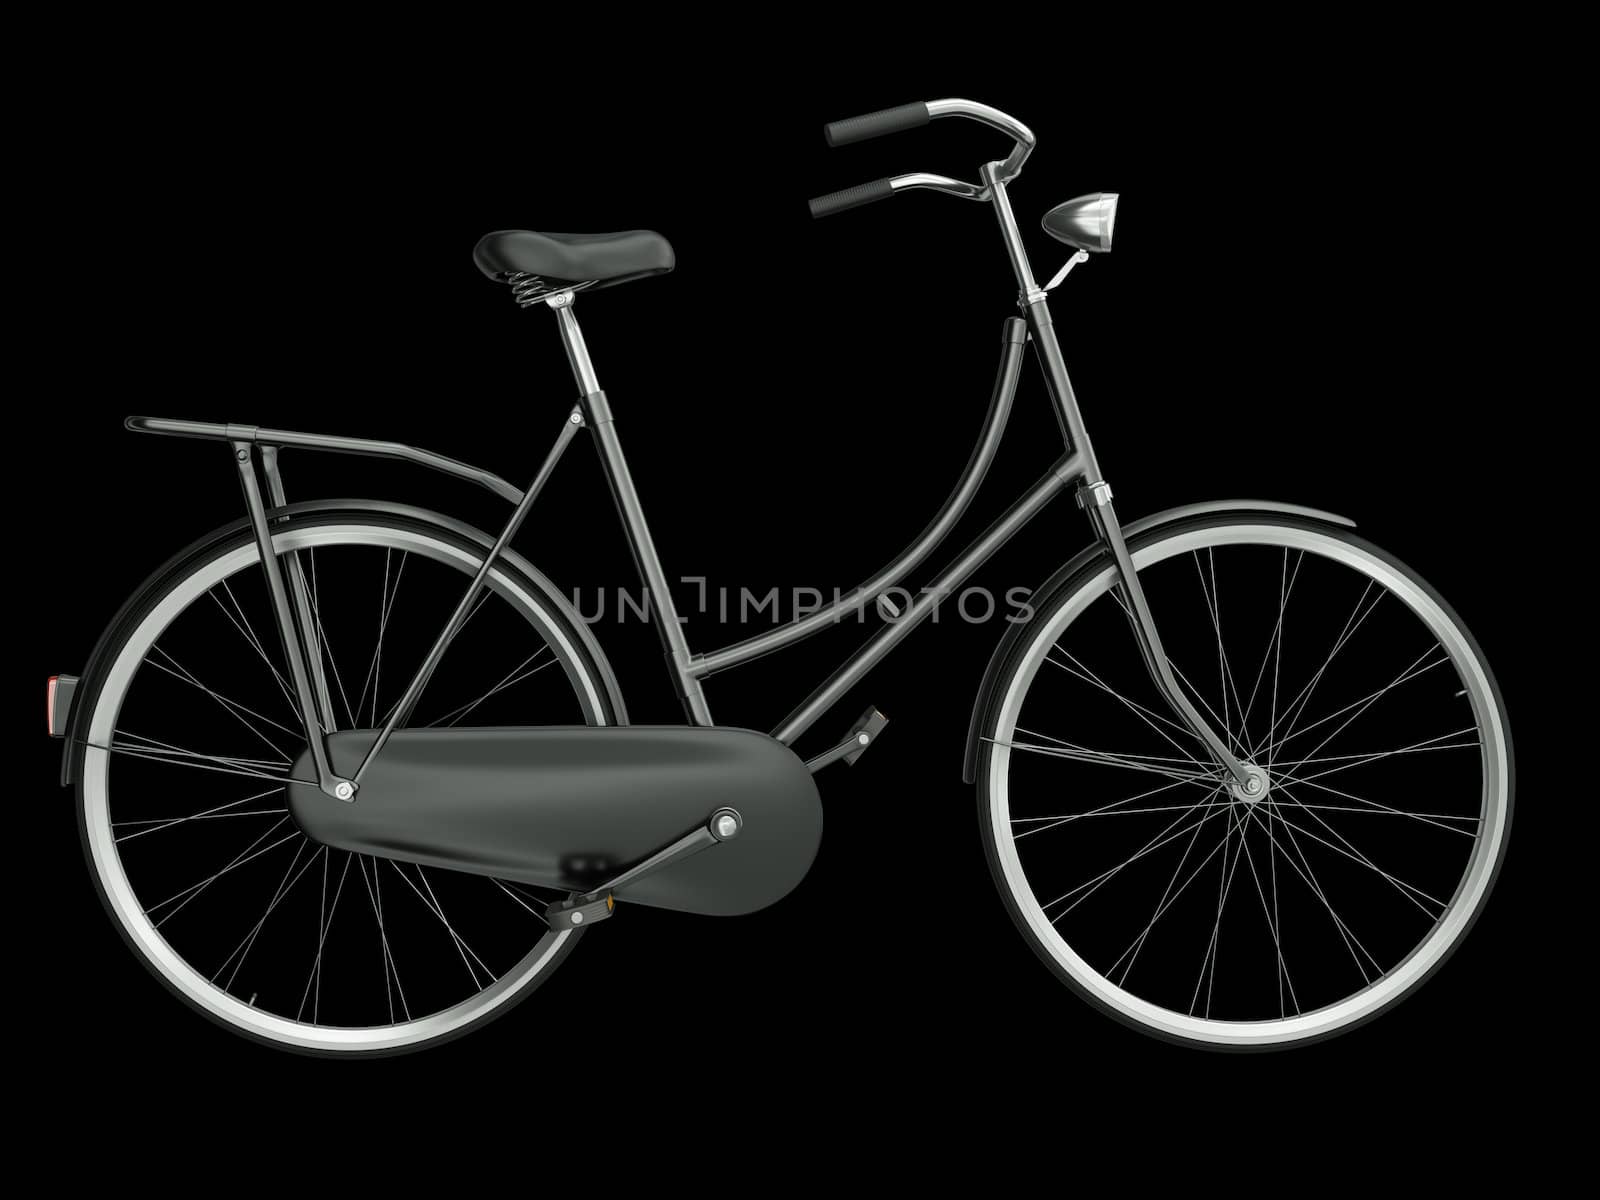 Black bicycle by bayberry